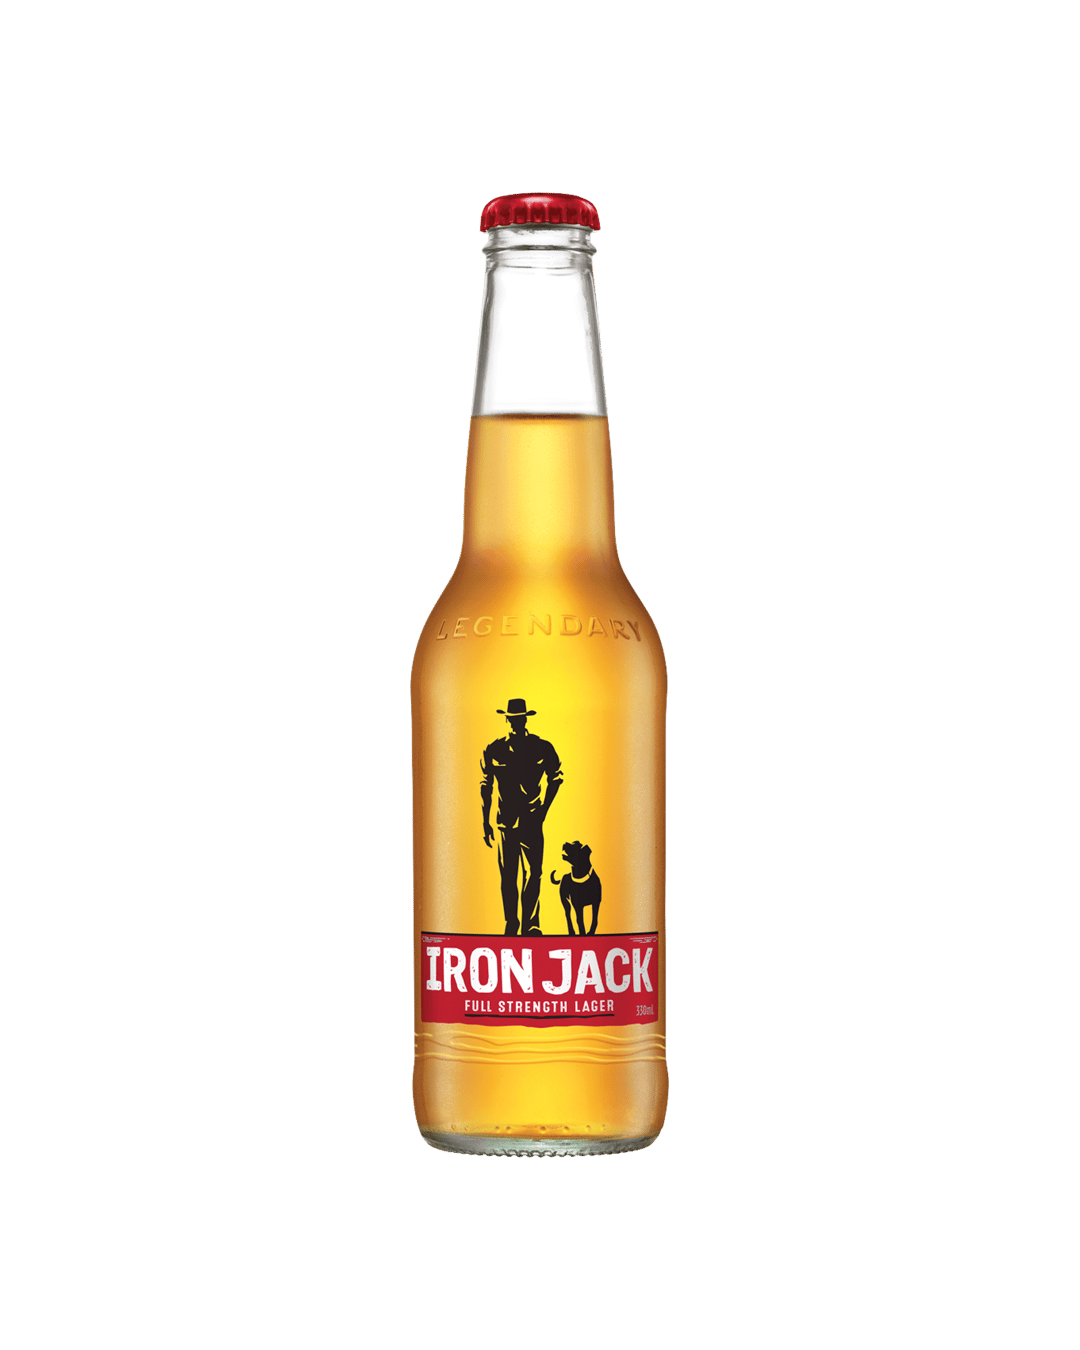 Buy Iron Jack Crisp Lager Bottles 330ml Online Or From Your Nearest Store At Everyday Low